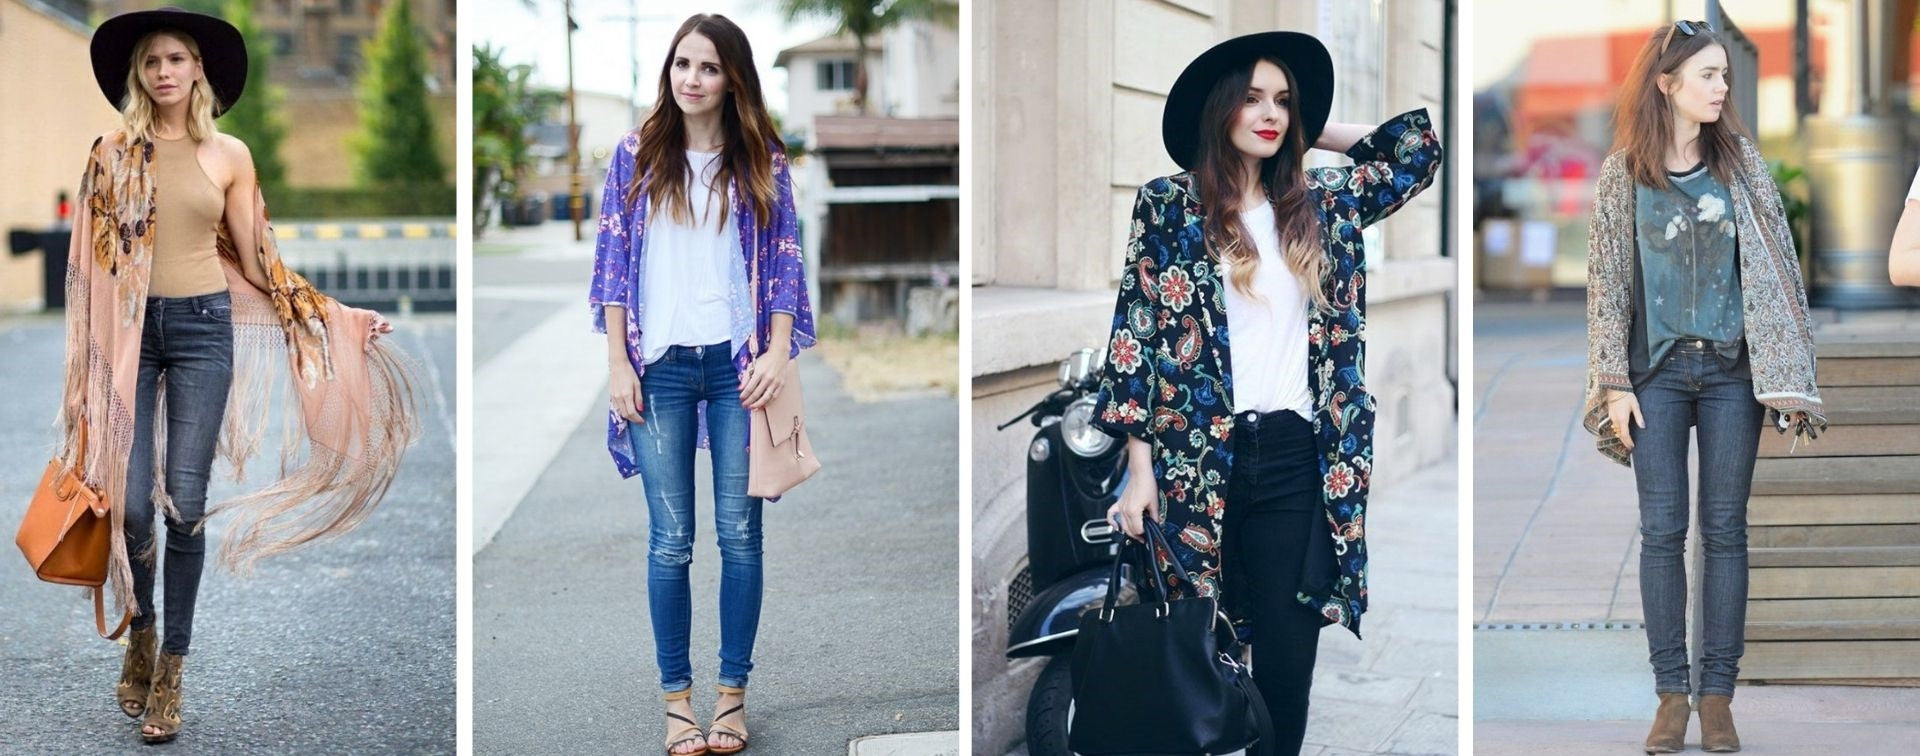 How to wear a kimono jacket? [Guide + Outfit Ideas]